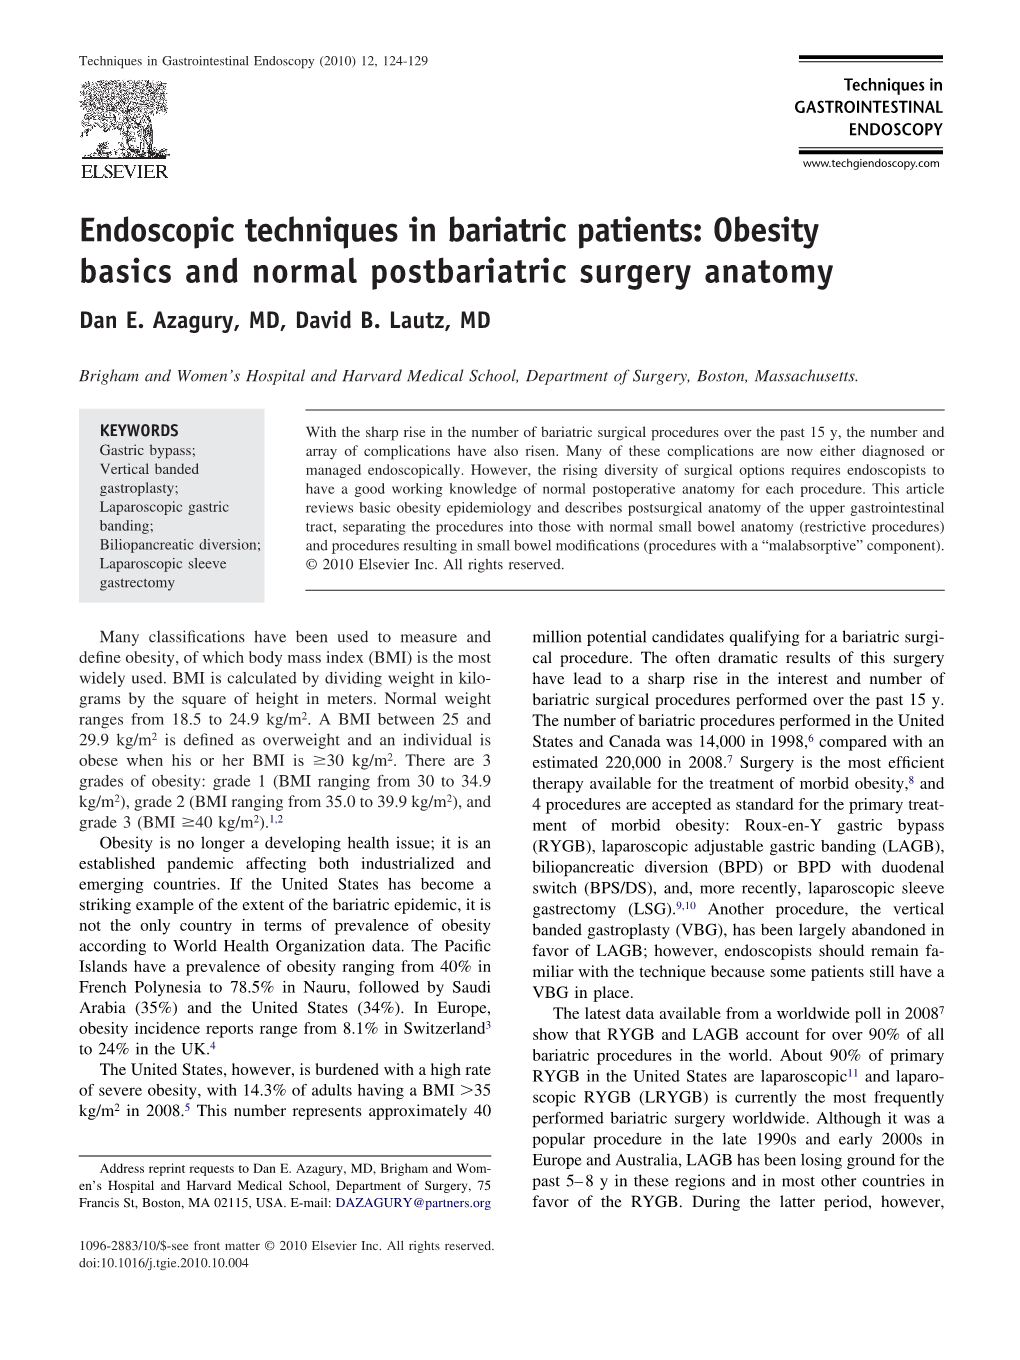 Endoscopic Techniques in Bariatric Patients: Obesity Basics and Normal Postbariatric Surgery Anatomy Dan E